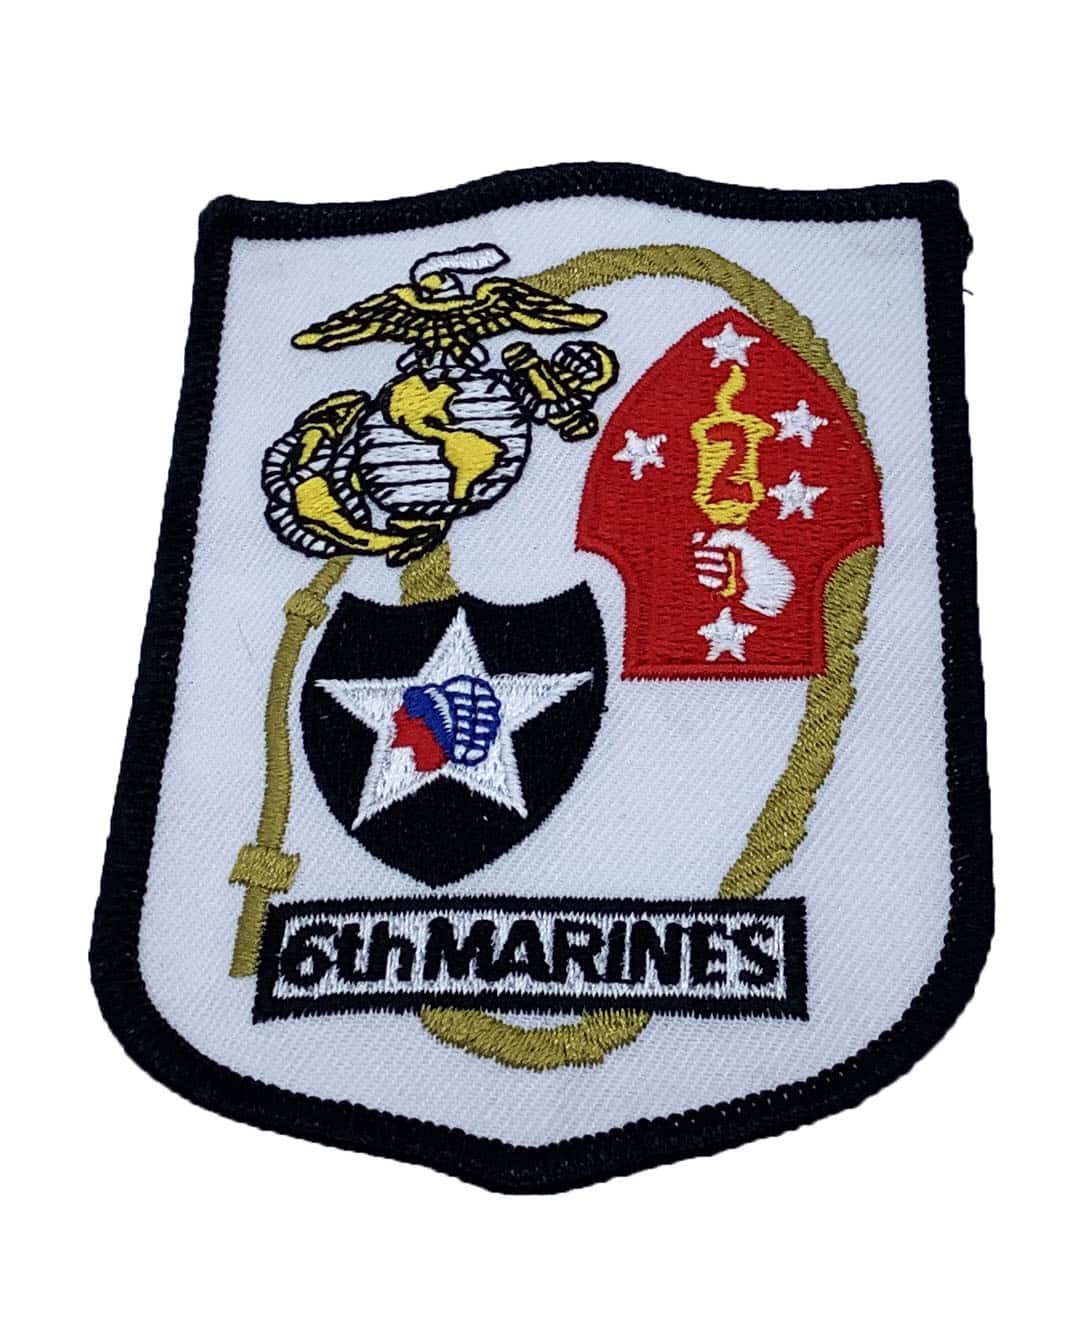 US MILITARY PATCH USMC 2ND MARINE DIVISION HOOK AND LOOP BACK MARINE CORPS